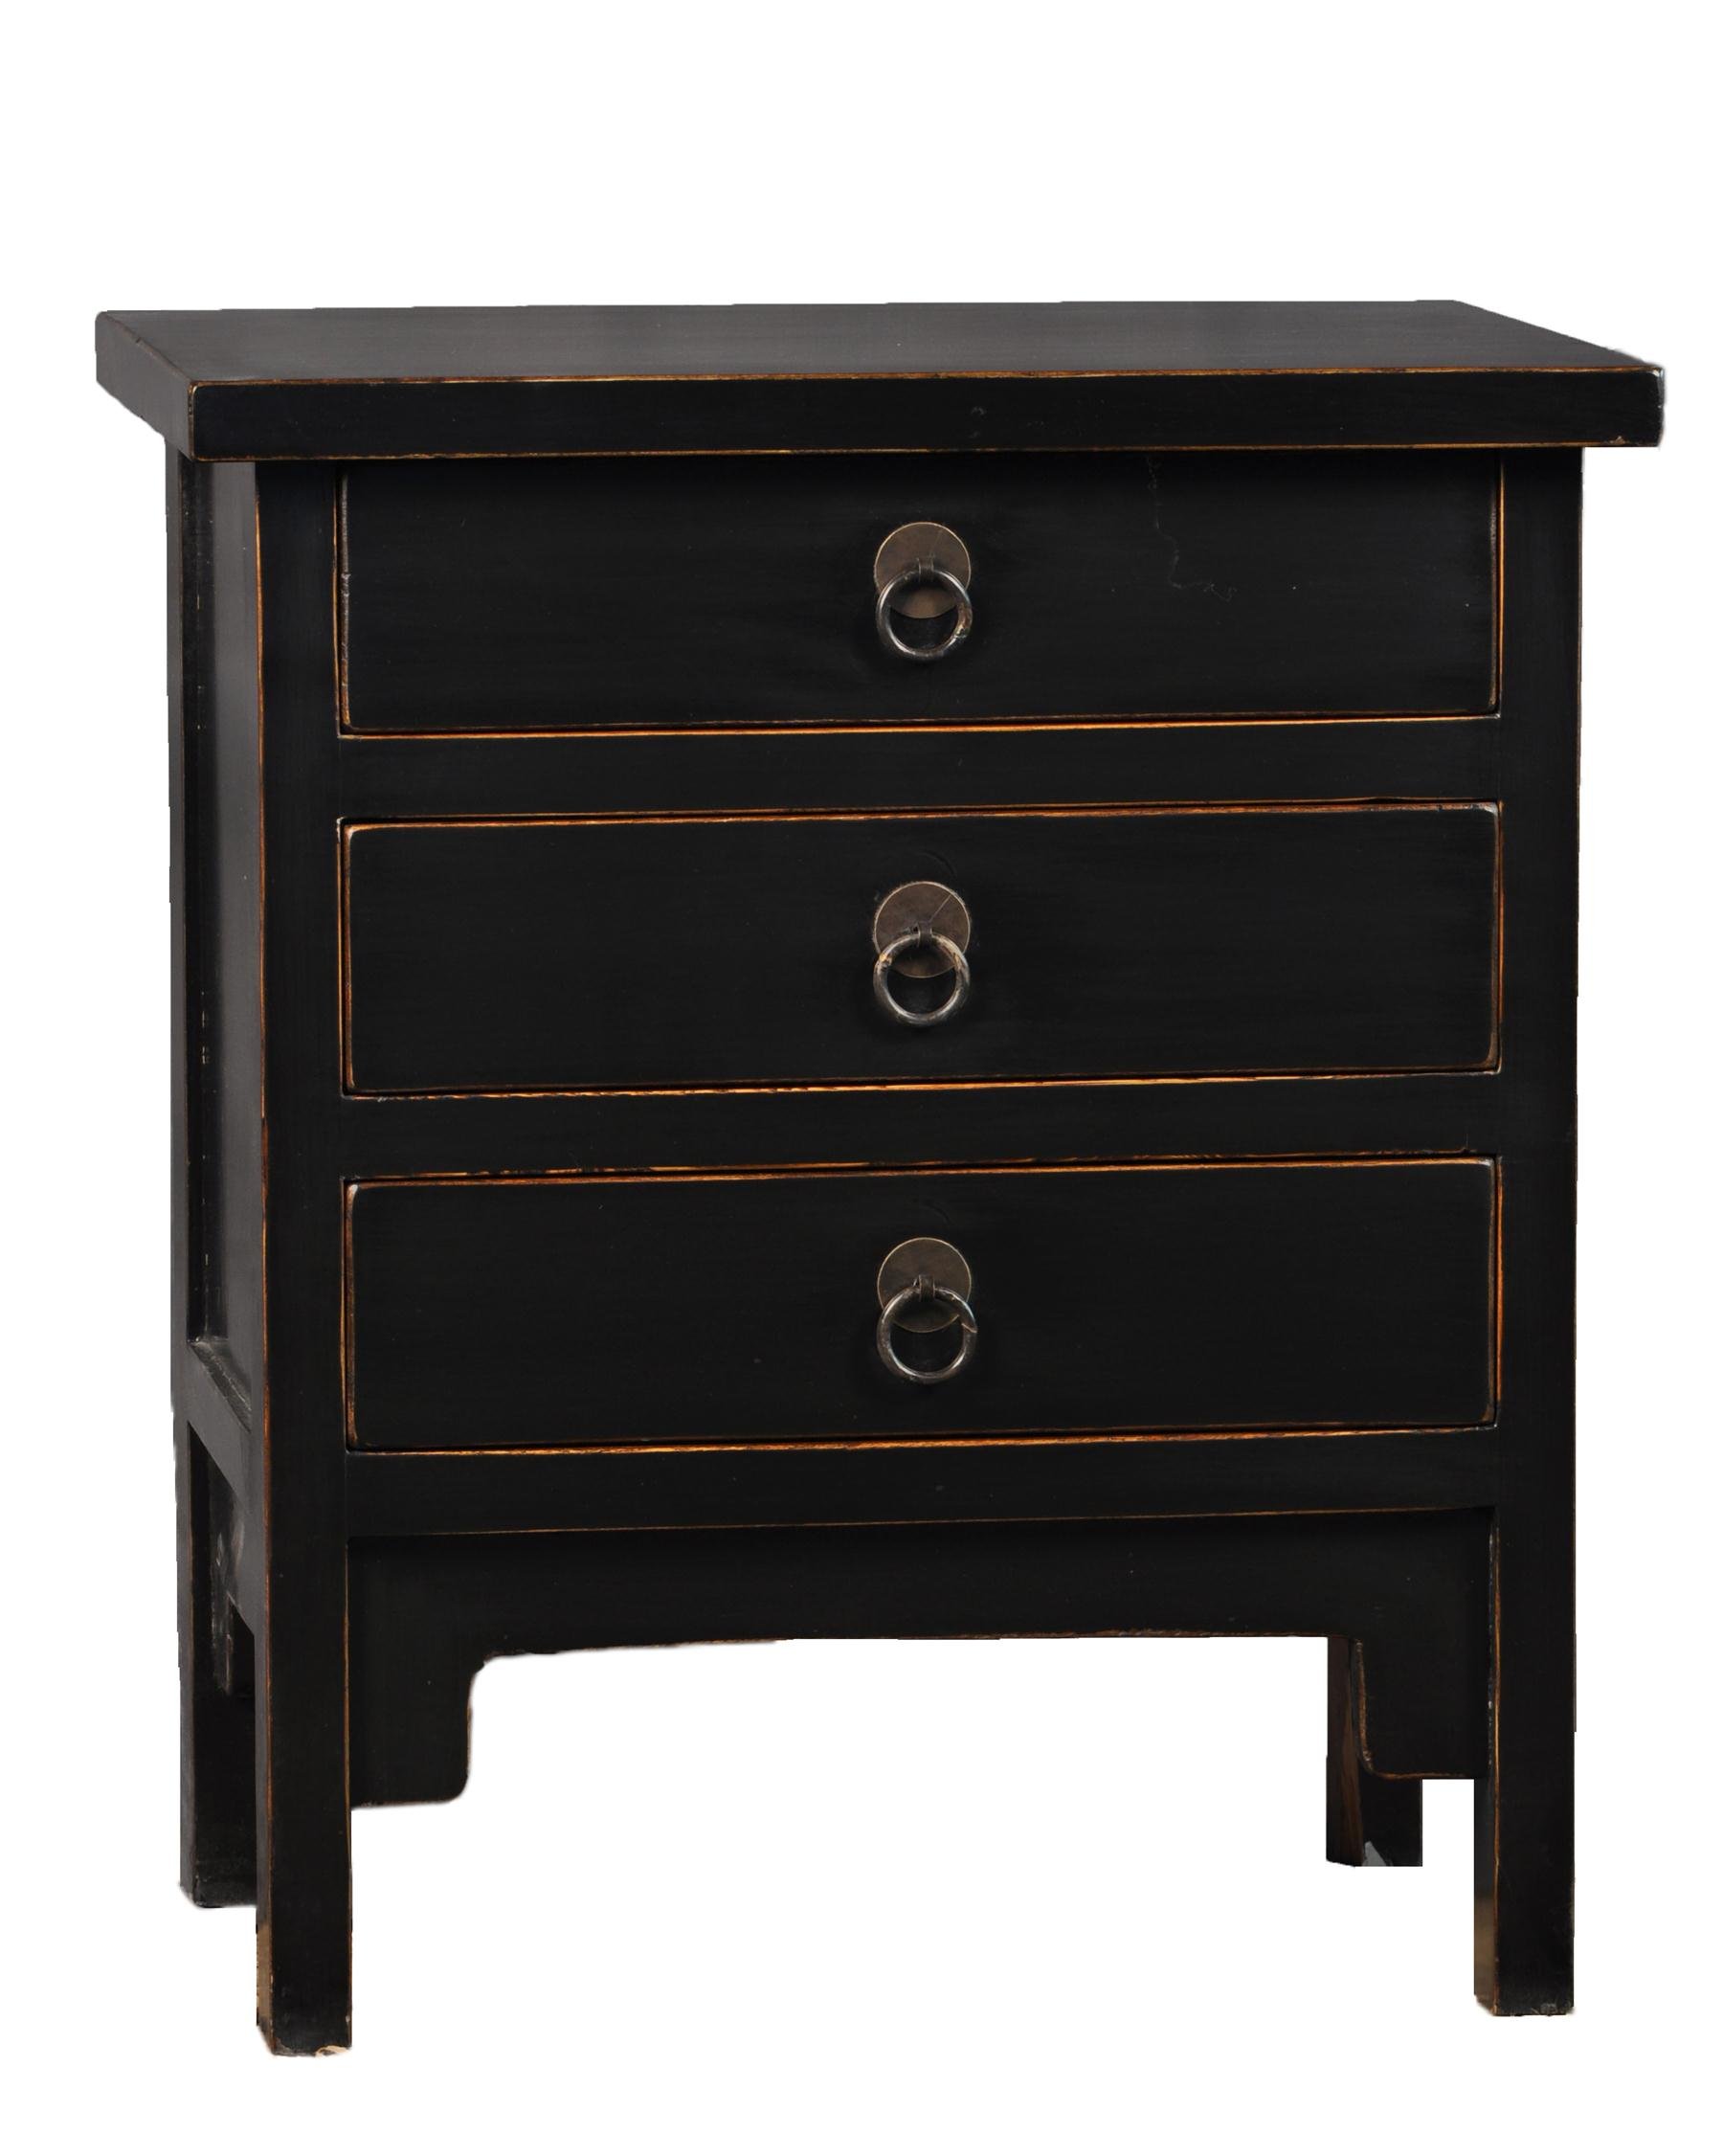 antique revival wooden drawer end table black lacquer drawers description glass top replacement round rattan coffee with stools stone living room tables corner oak furniture pipe